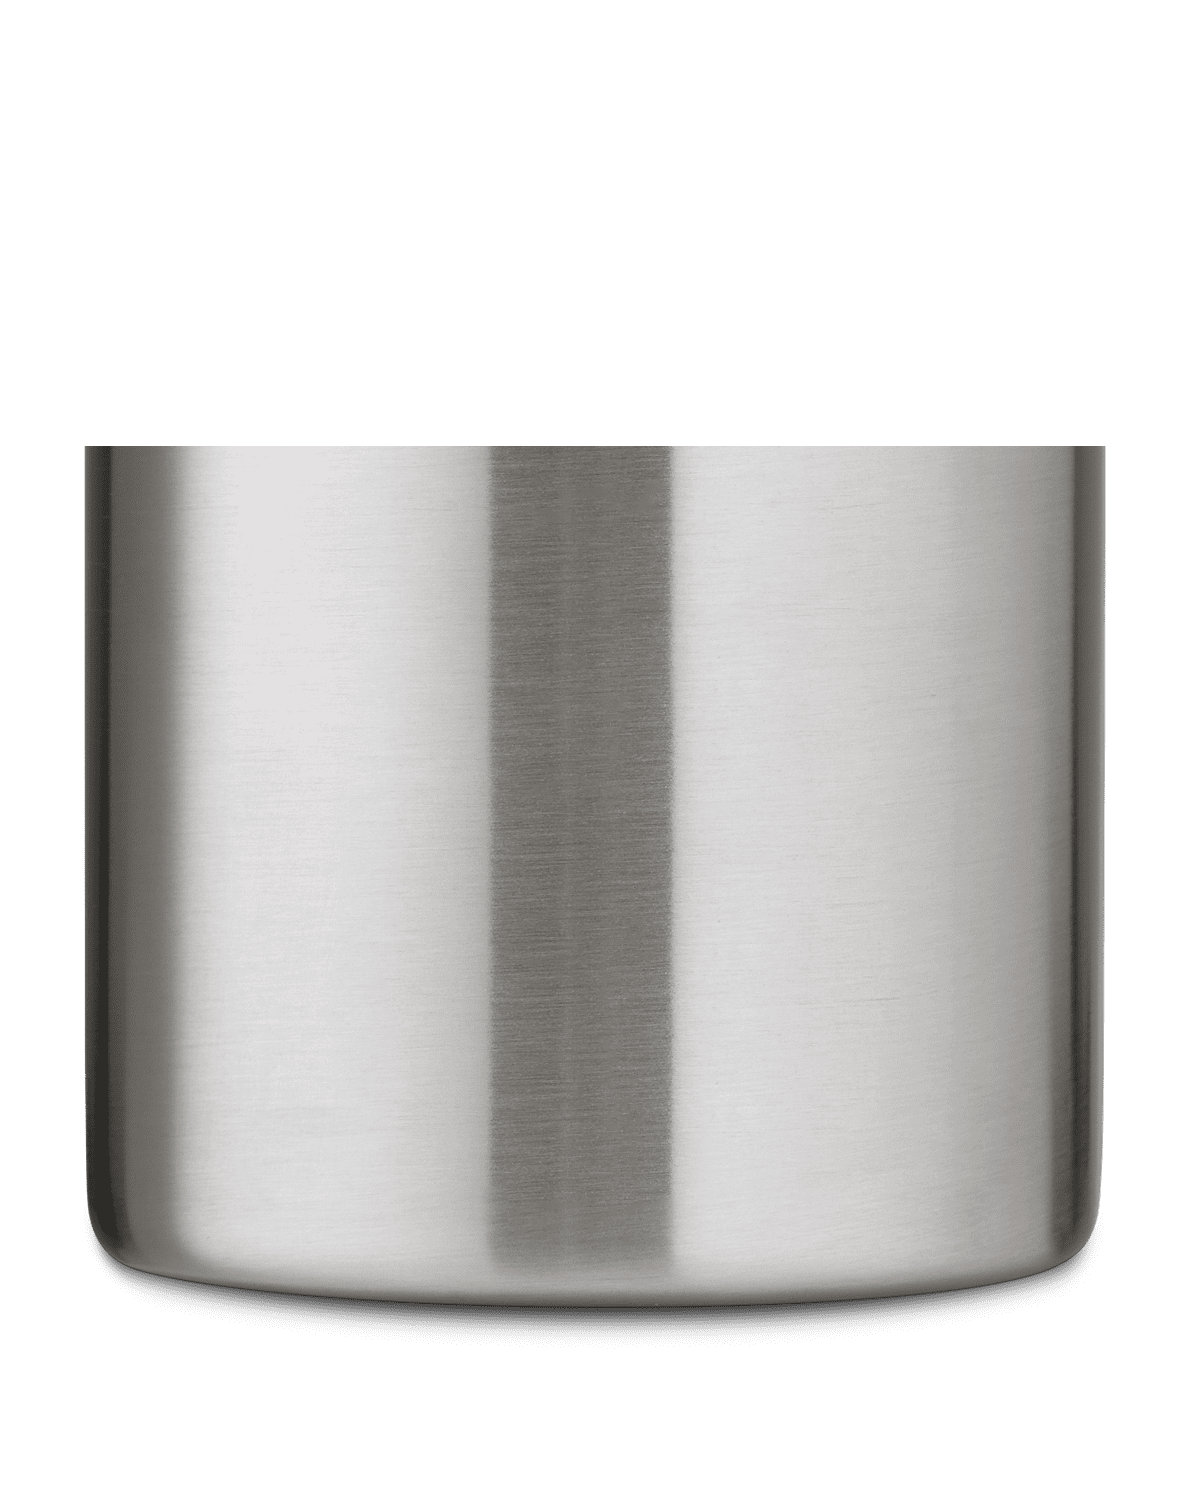 Shop On Line Brushed Steel - 350 ml Acquisto